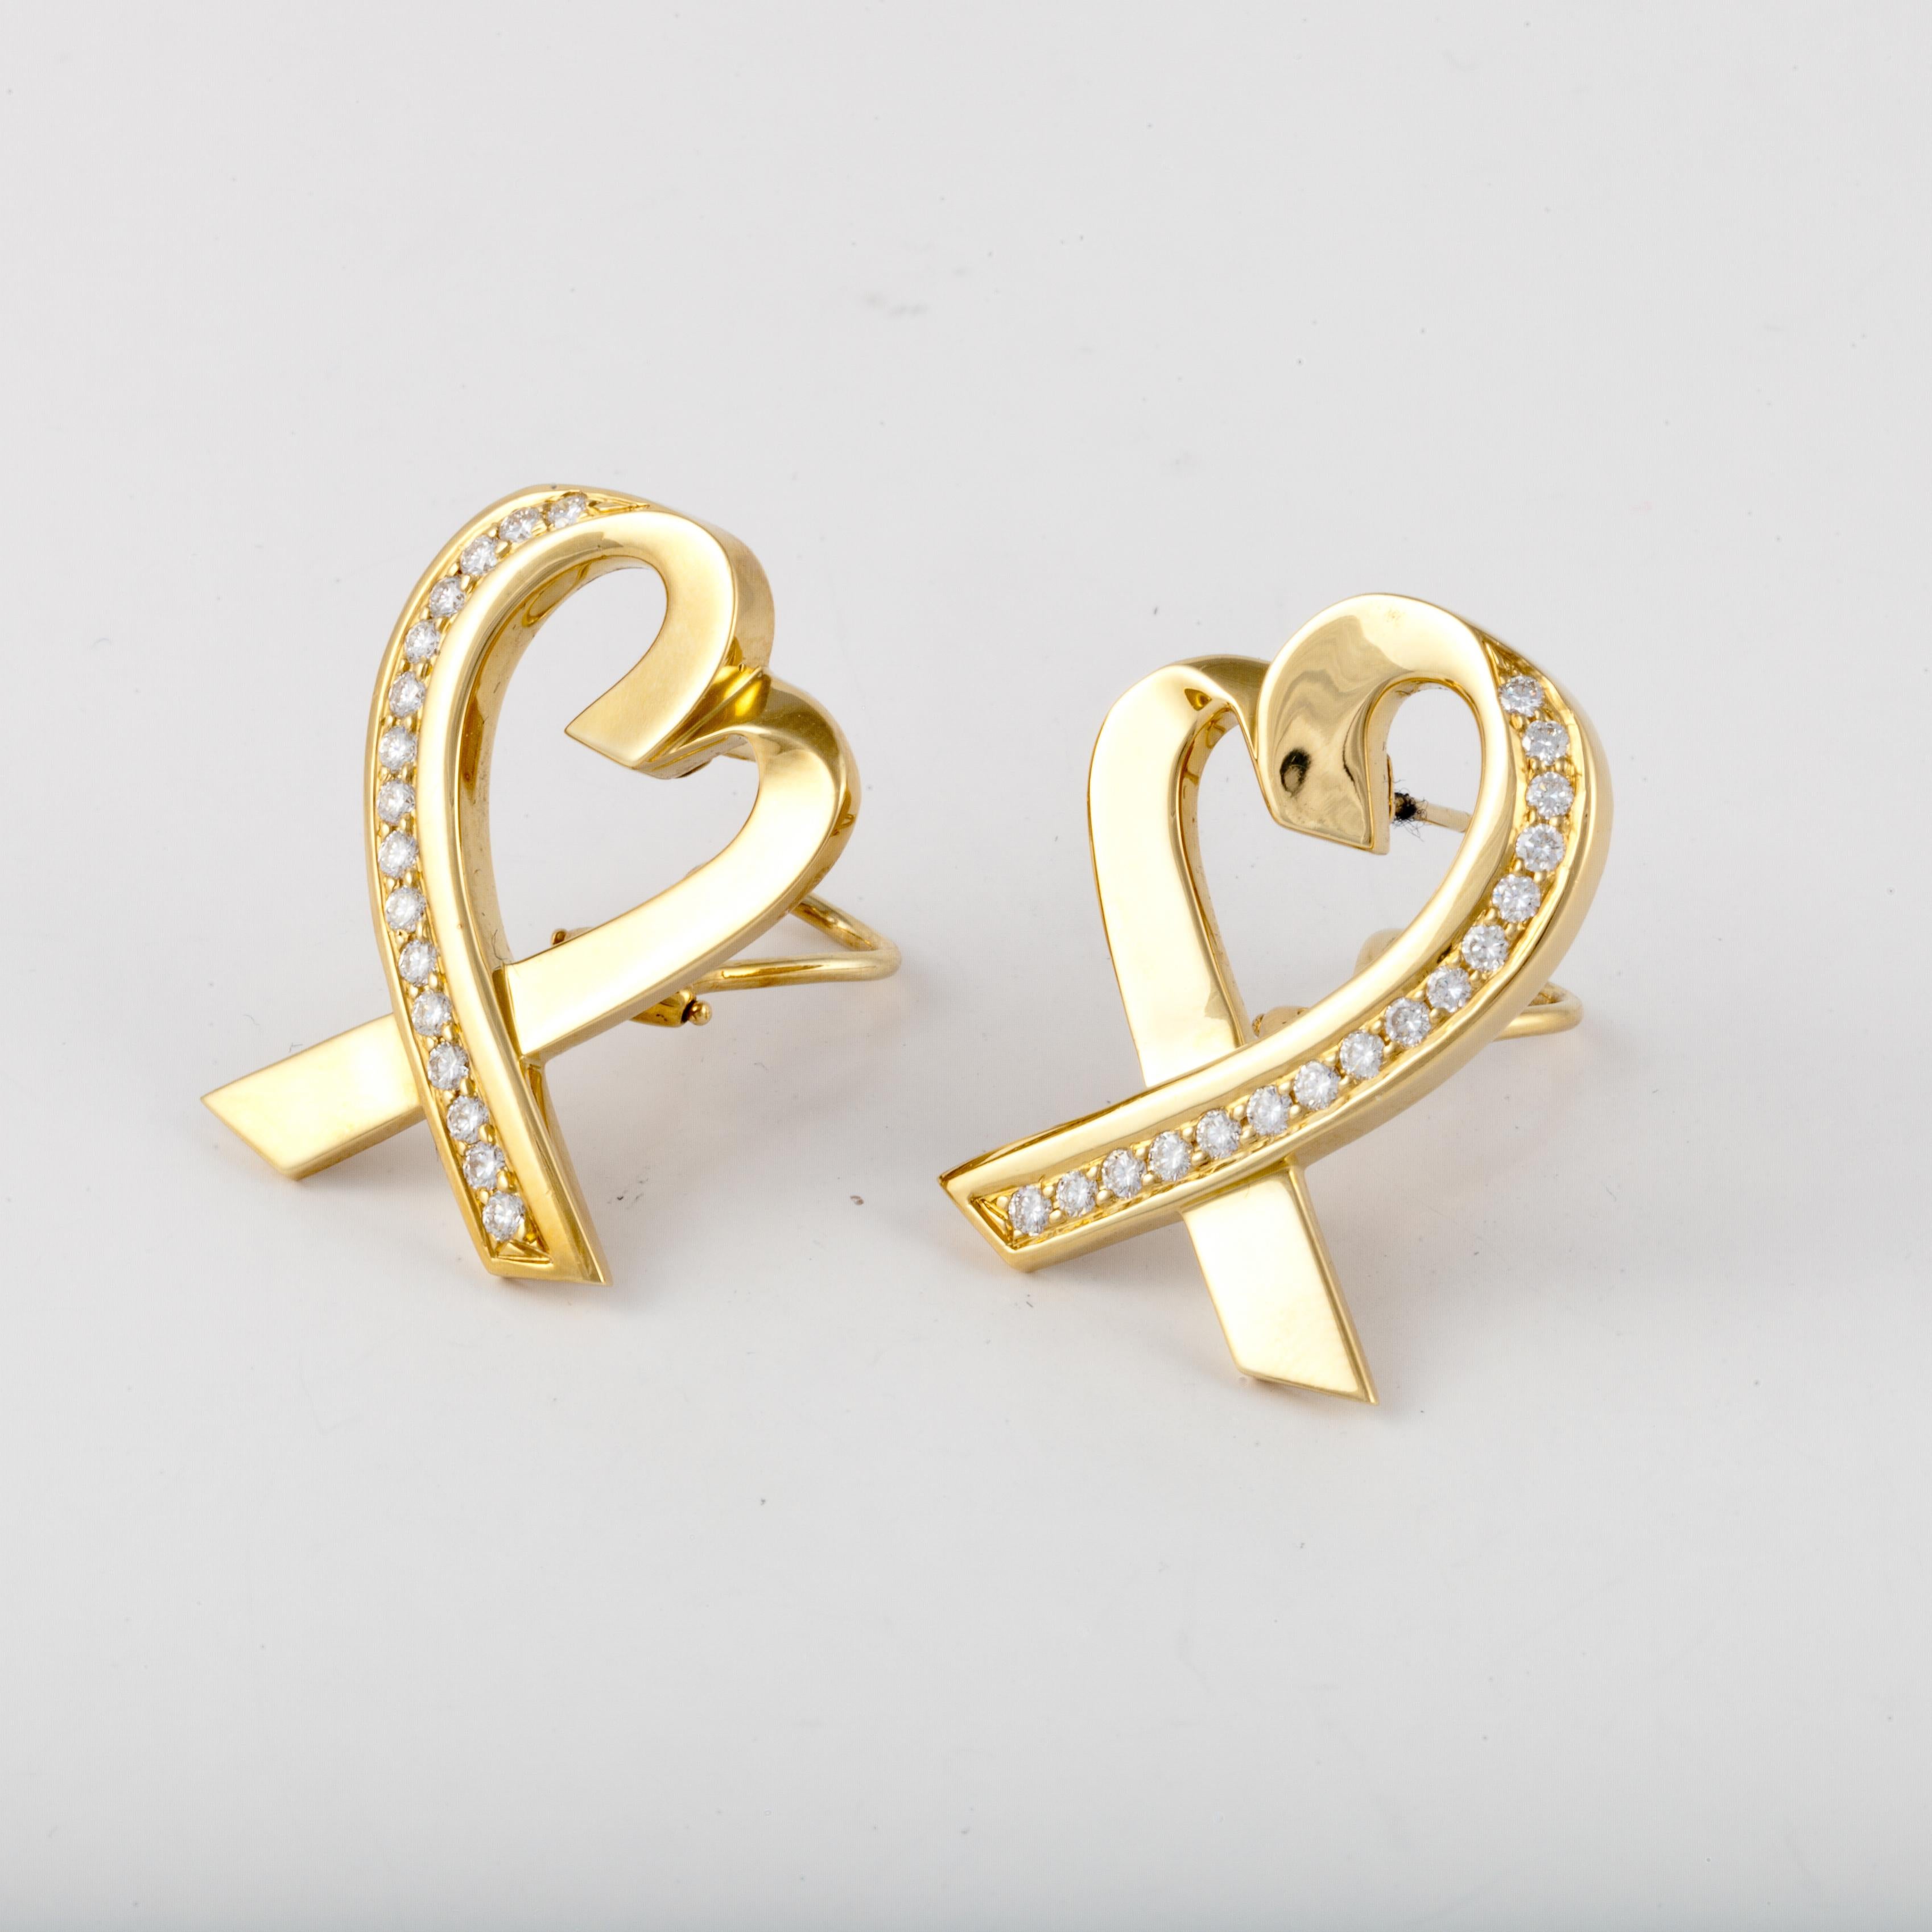 Tiffany & Co. Paloma Picasso 18K yellow gold heart earrings accented with round diamonds.  Total diamond carat weight is 1.25; F-G color and VVS-VS clarity.  They measure 1 1/4 inches by 7/8 inches.  